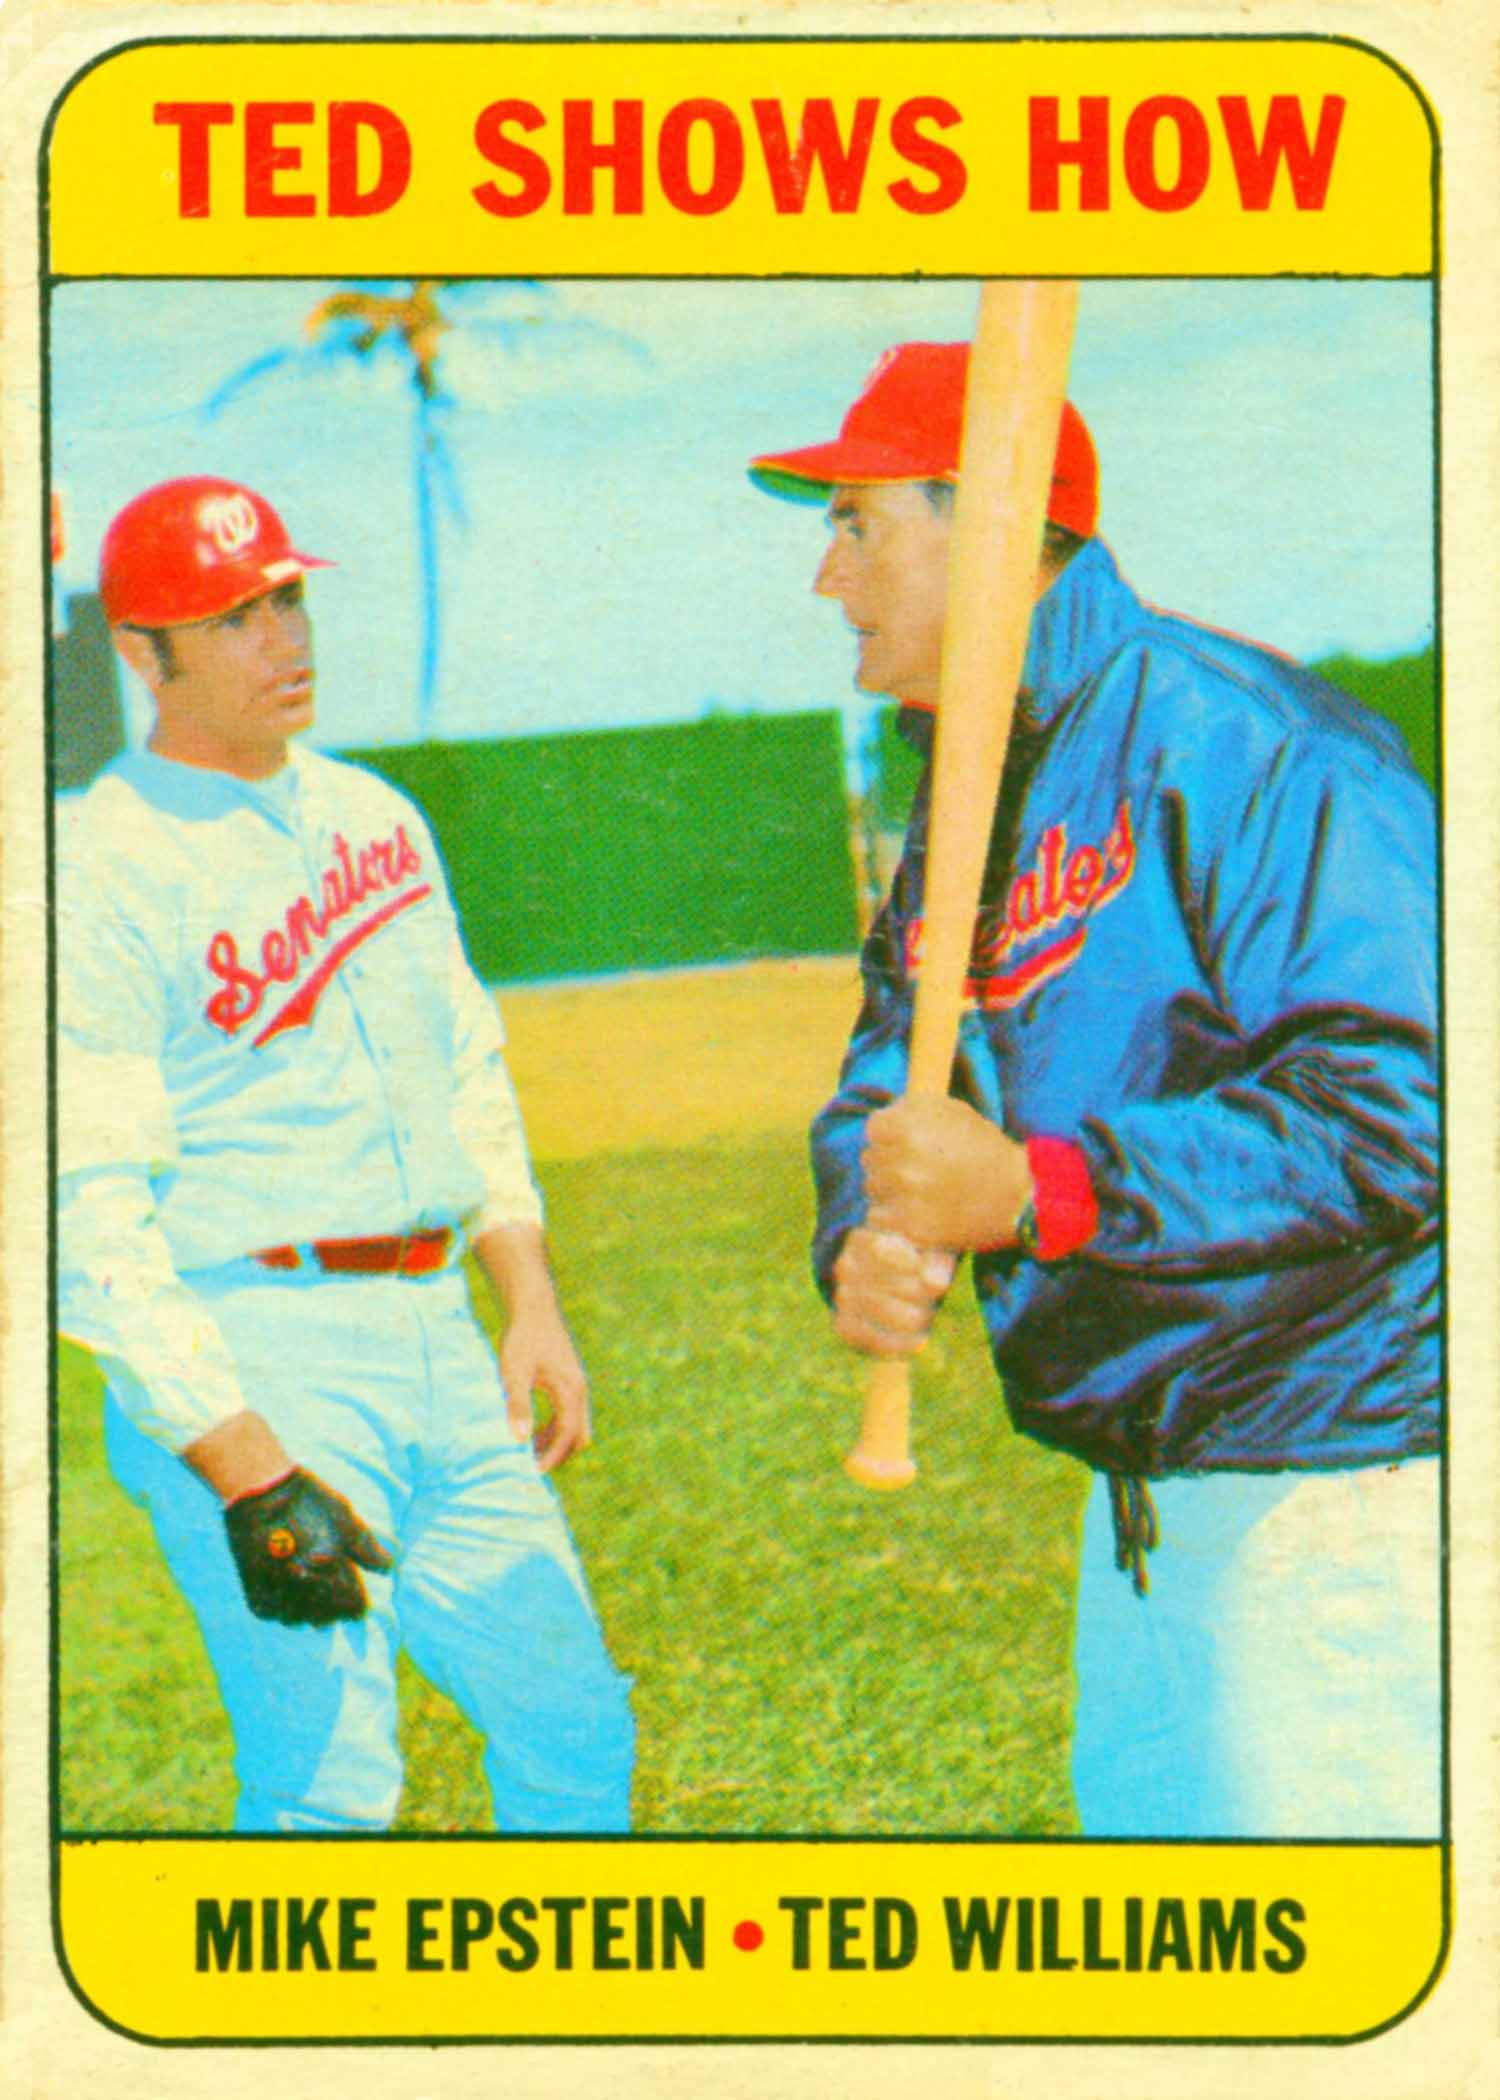 1969 Topps Ted Shows How